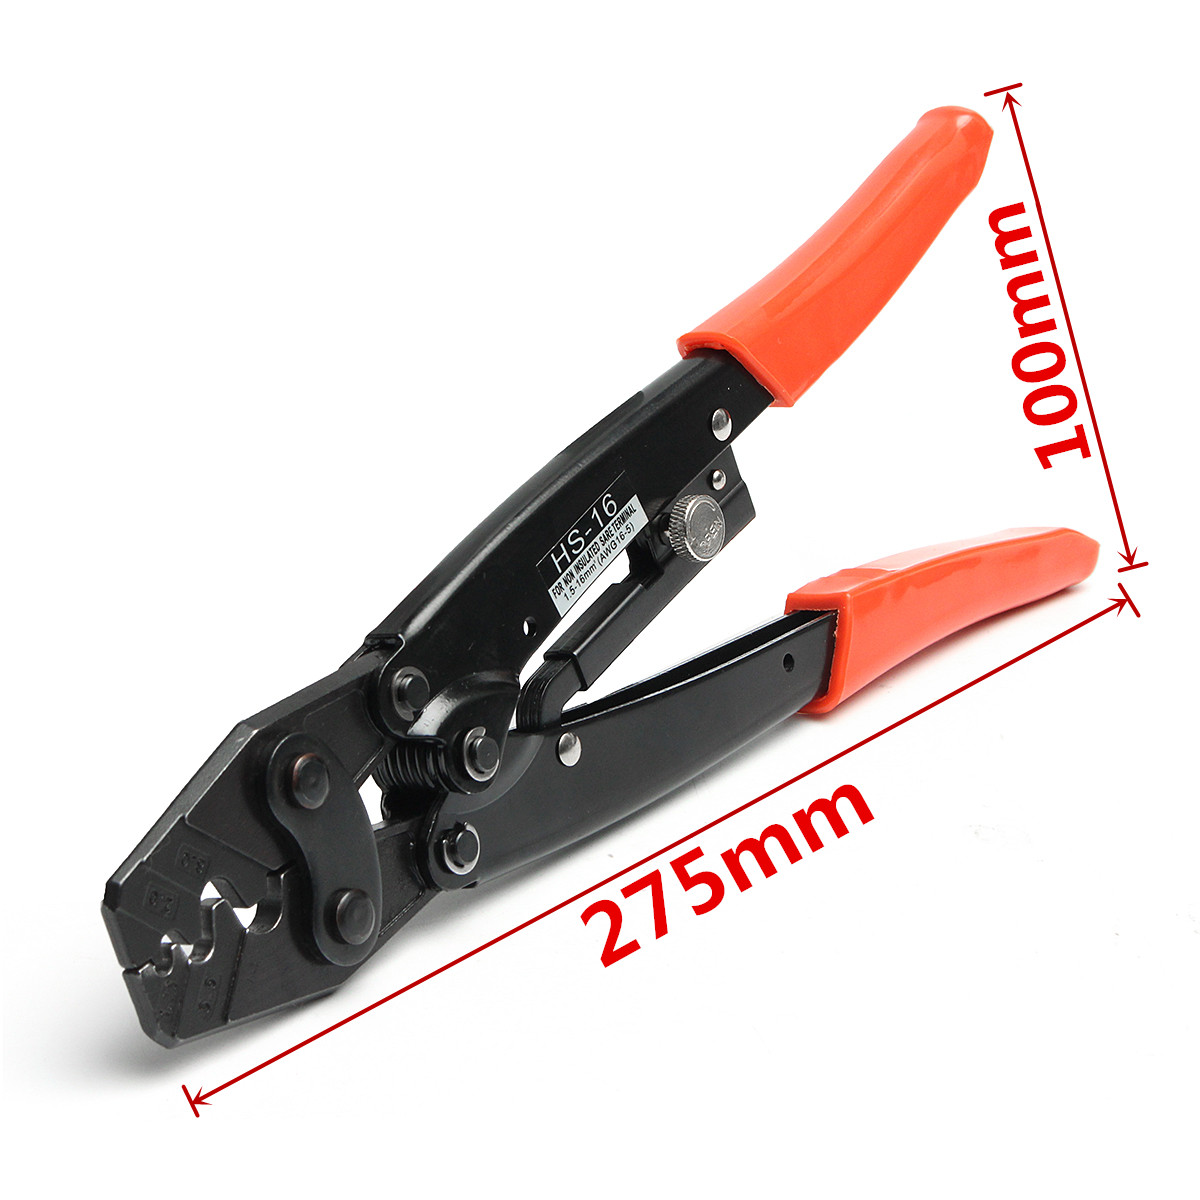 50-Amp-125-16-mm2-Plug-Cable-Crimping-Tool-For-Wire-Crimper-Terminals-Links-1131124-2